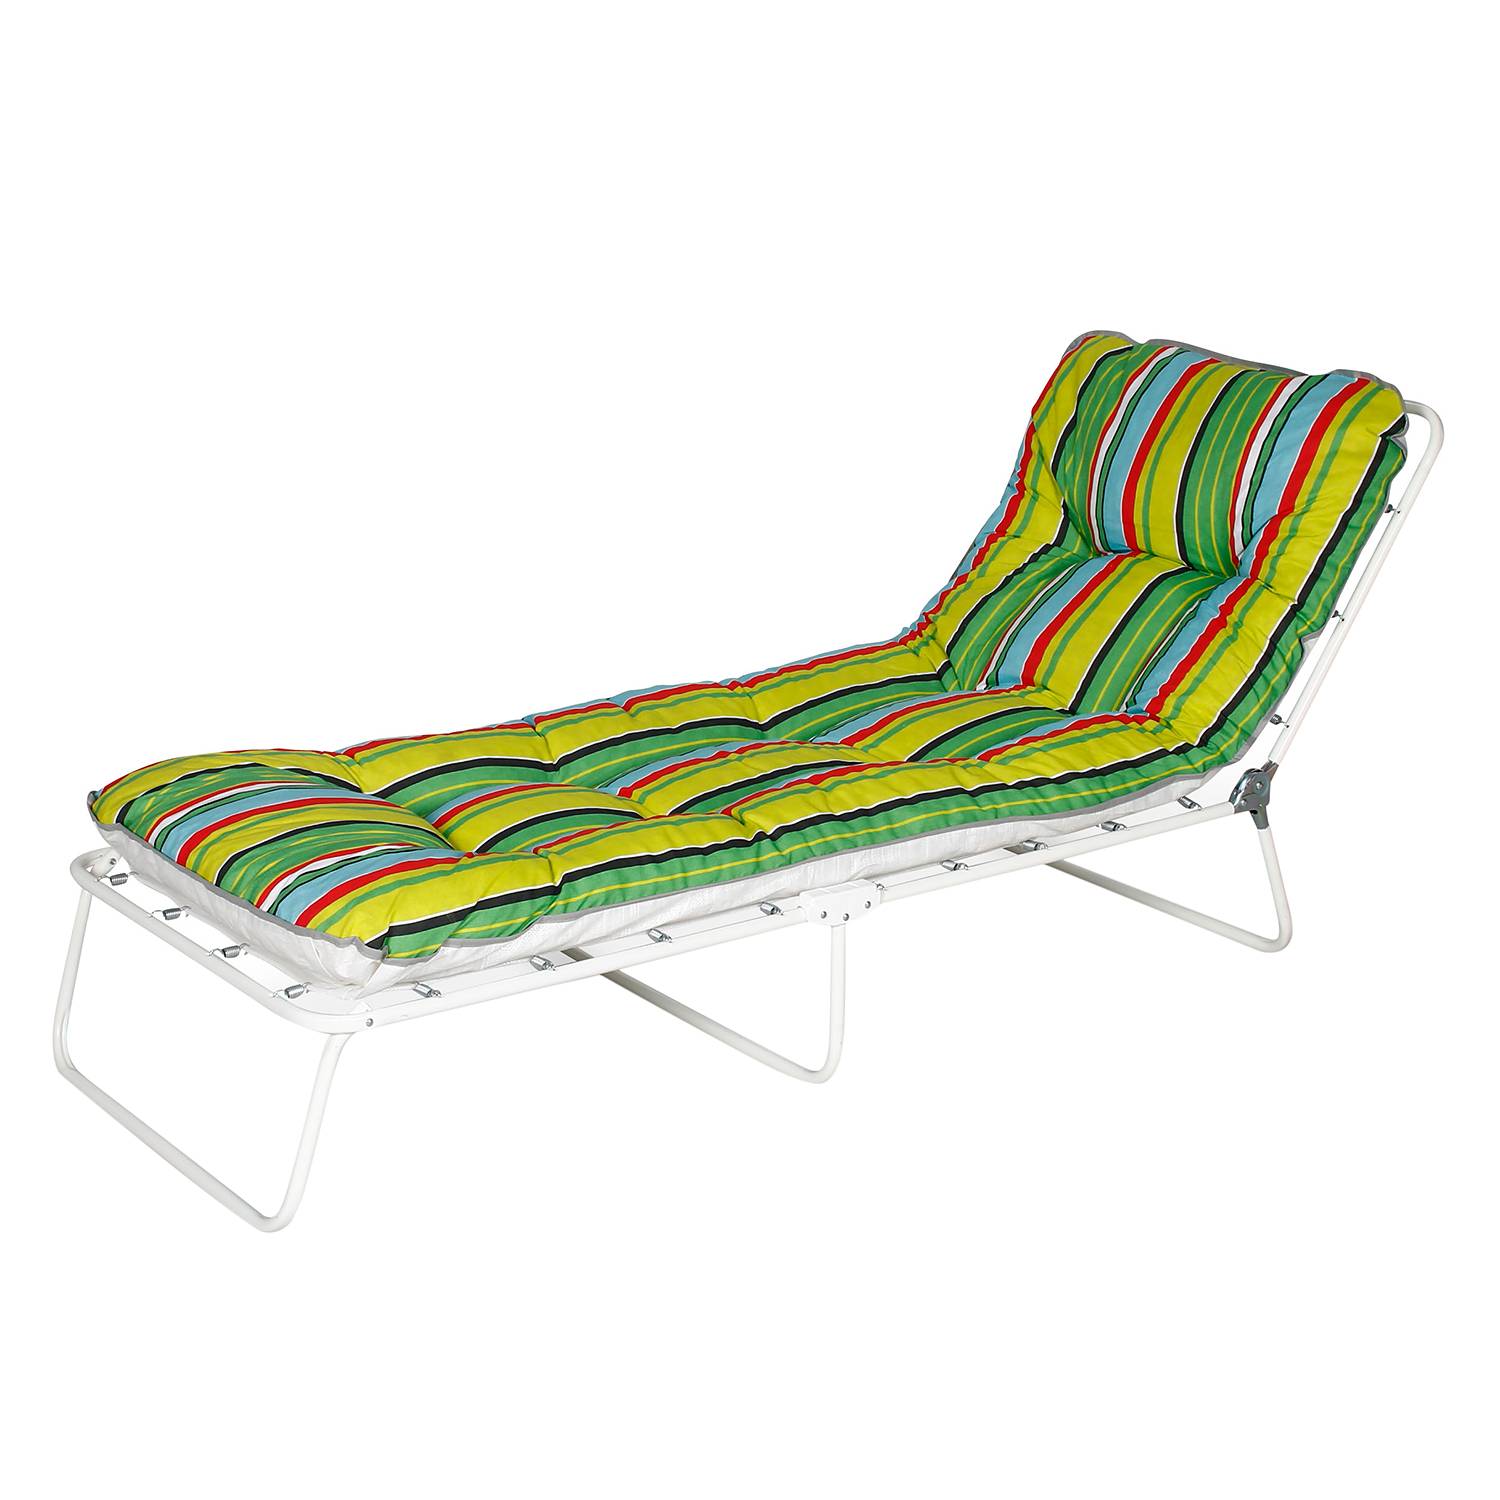 Image of Chaise longue Woerthersee 000000001000155196